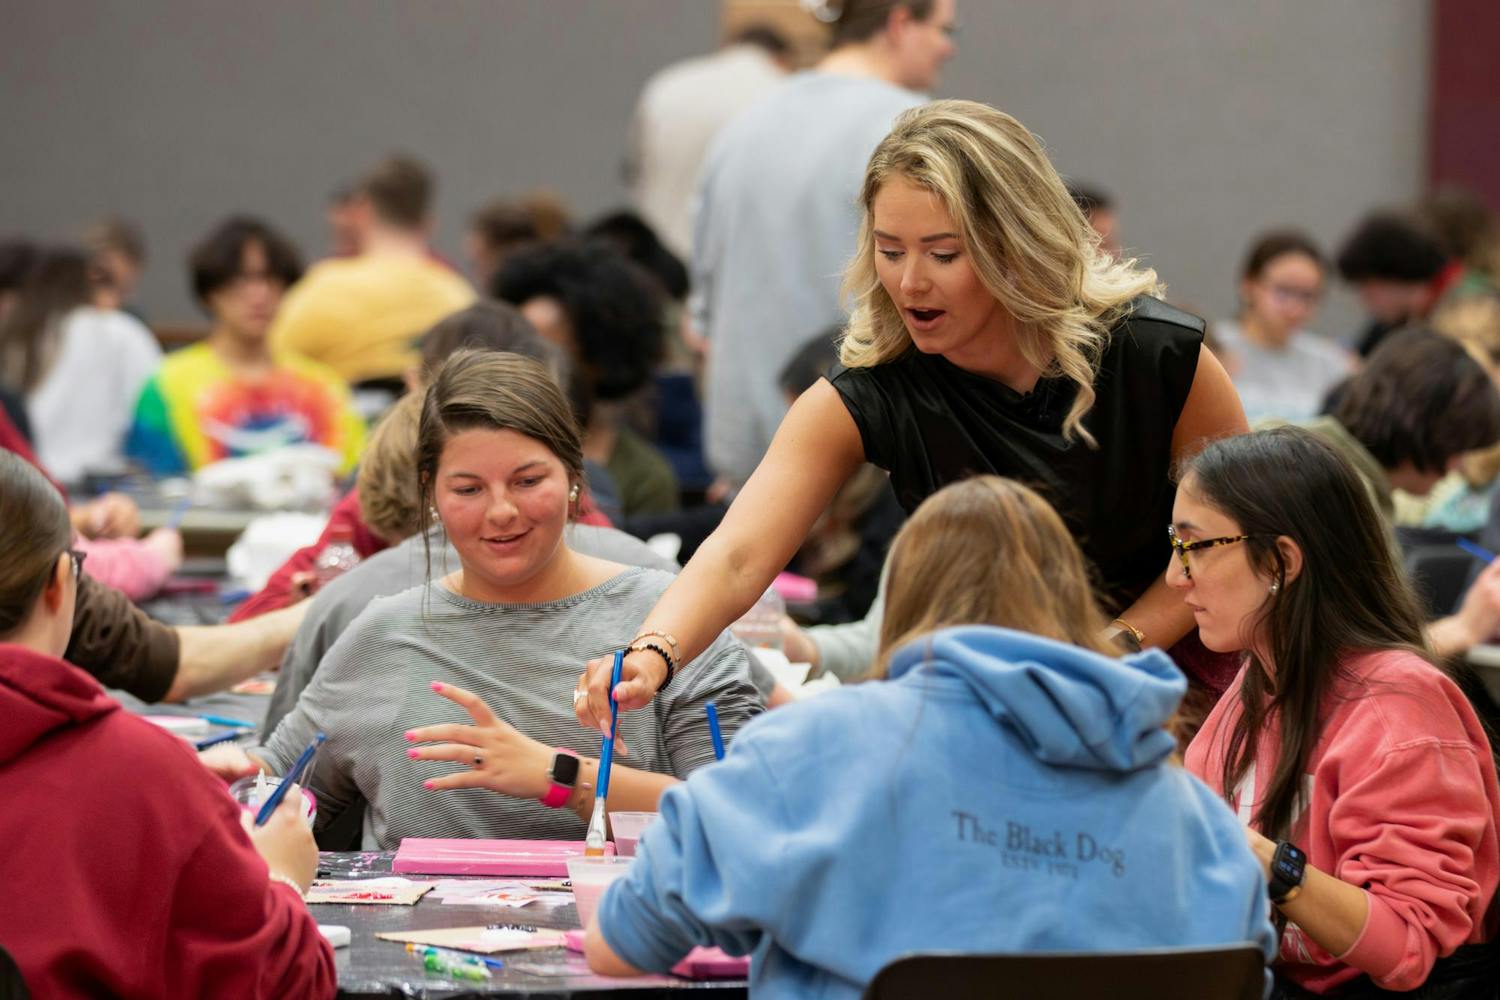 Summer Rogers helps a ɫɫƵ during her canvas painting class on Feb. 8, 2024. The free class, hosted by alumna Rodgers, allowed ɫɫƵs to create their own ɫɫƵ-themed paintings.